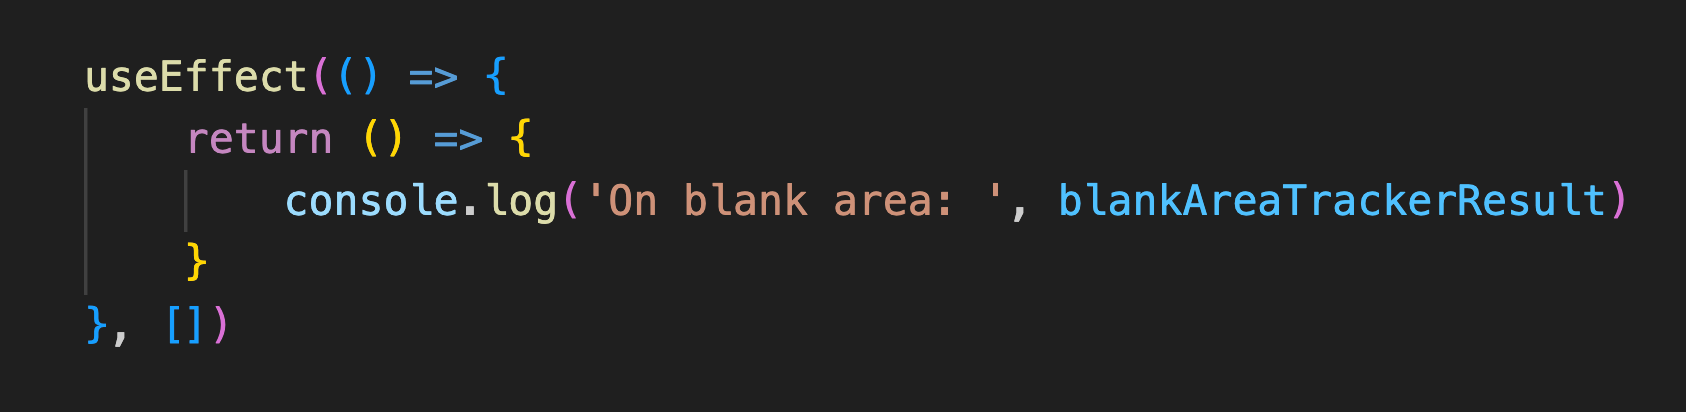 useEffect() hook to get “Blank Space” raised output